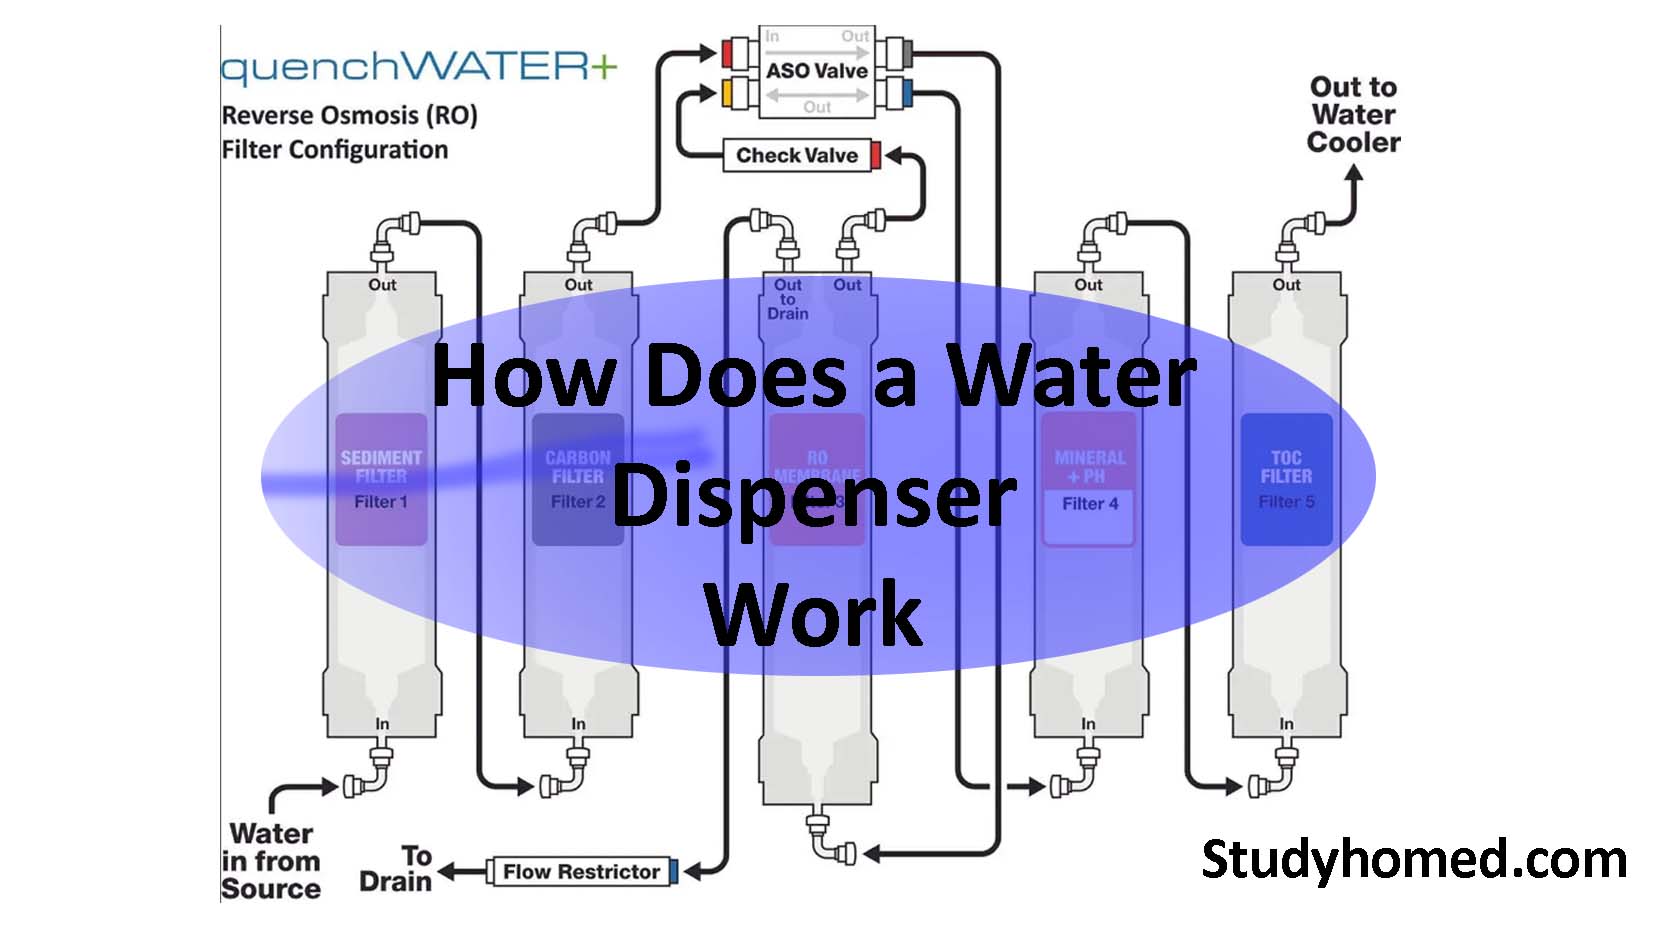 How Does a Water Dispenser Work Properly